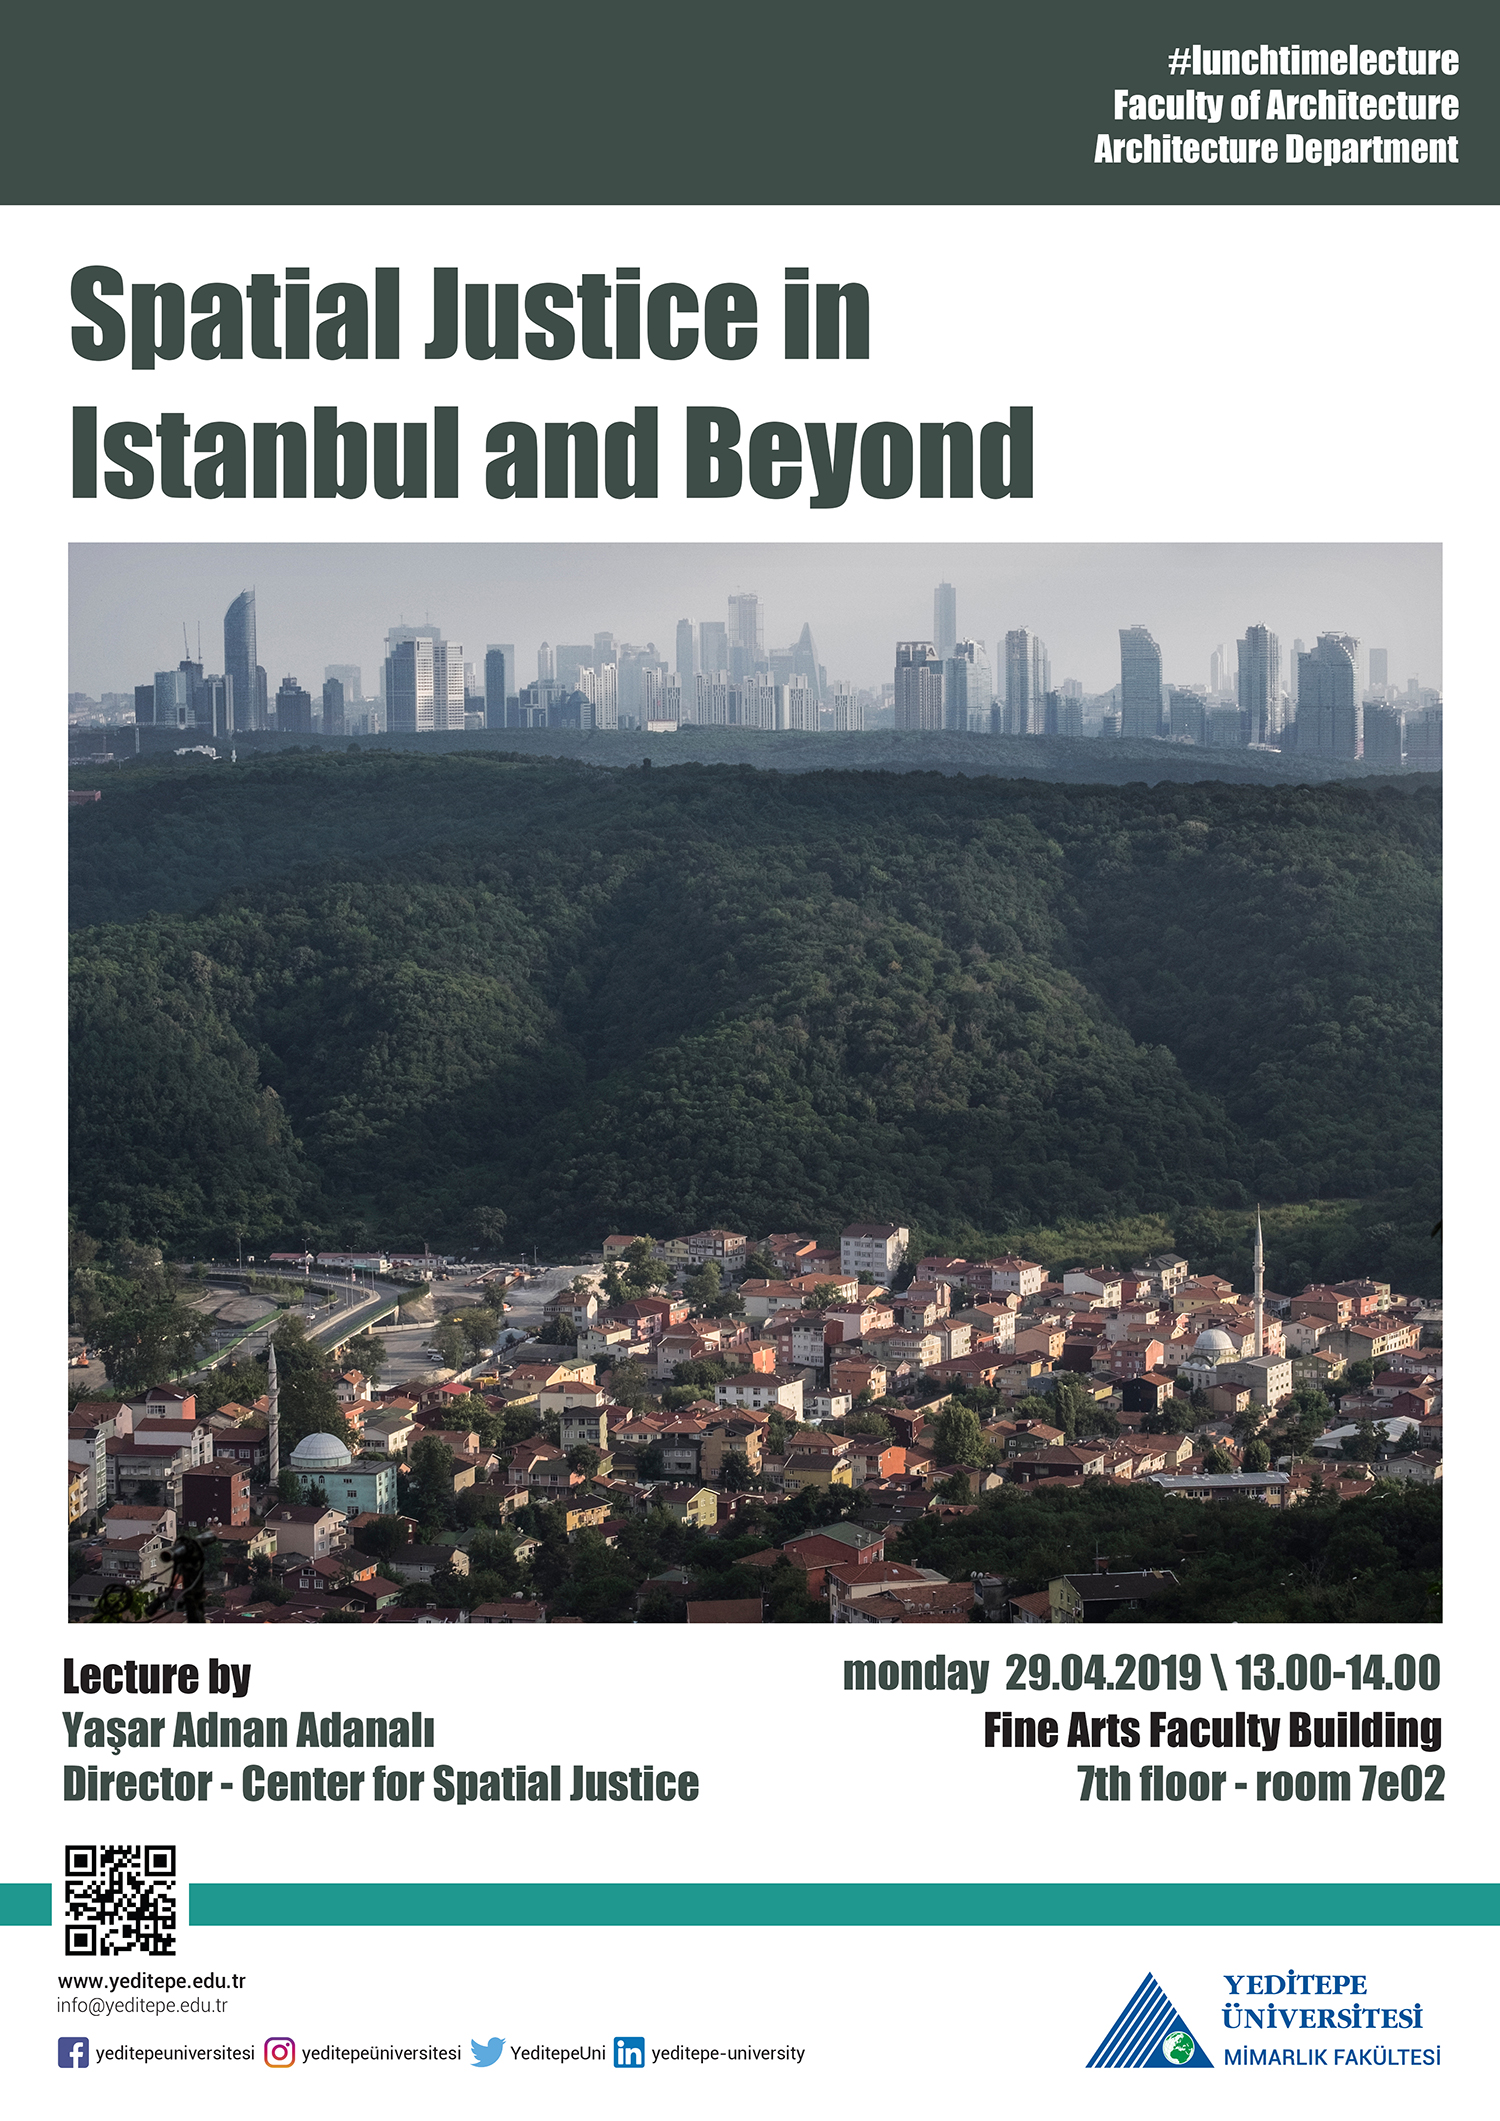 Spatial Justice in Istanbul and Beyond